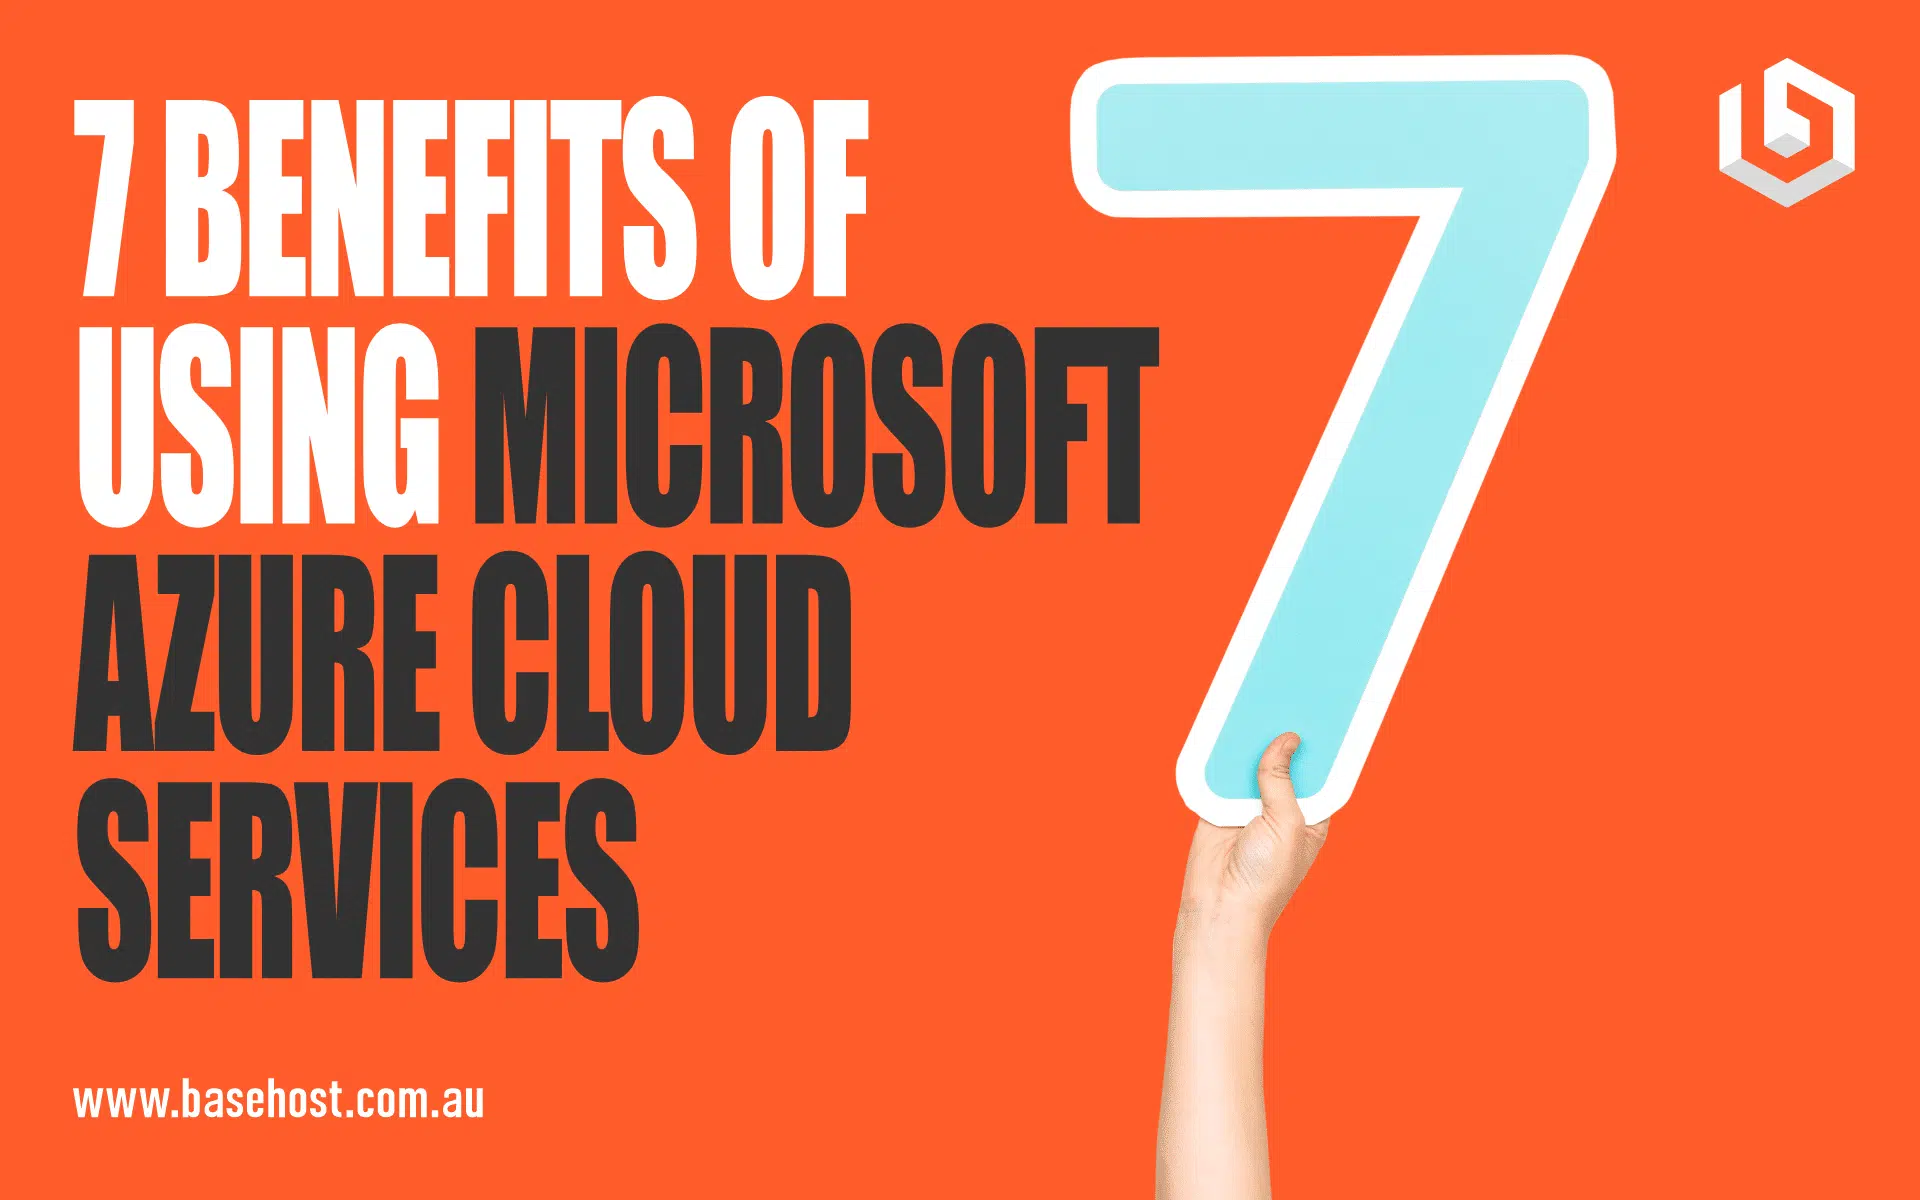 Benefits of Using Microsoft Azure Services - Fully outsourced IT and Marketing Service provider for Small to Medium Enterprises